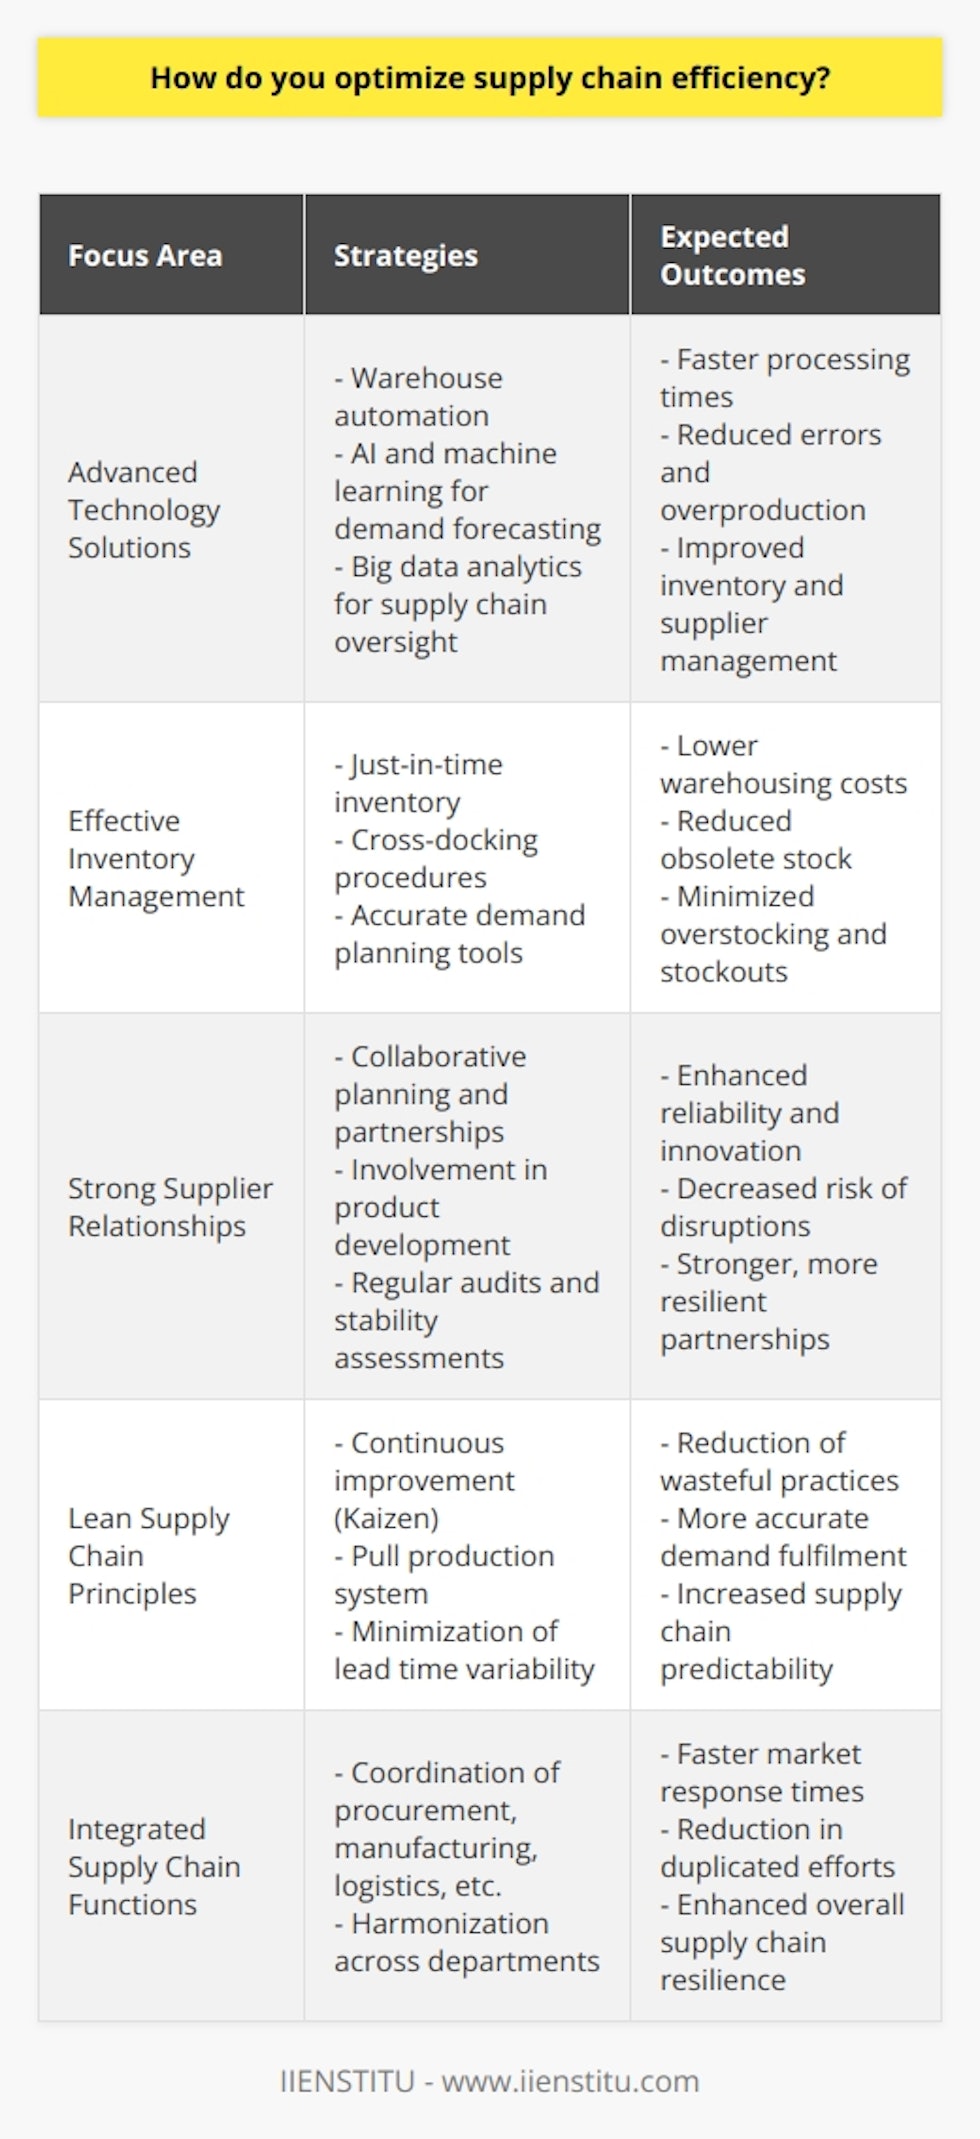 Optimizing supply chain efficiency is pivotal for businesses to stay competitive in today's global market. Here are some key methods to enhance supply chain operations.Employing Advanced Technology SolutionsIn the age of the Fourth Industrial Revolution, advanced technology solutions are at the forefront of supply chain optimization. Warehouse automation, employing robotics and conveyor belts, accelerates handling processes, minimizes errors, and enables round-the-clock operations. Artificial Intelligence and machine learning algorithms facilitate predictive analytics for demand forecasting, reducing overproduction and stock obsolescence. Furthermore, big data analytics plays a critical role in scrutinizing supplier performance, identifying bottlenecks in logistics, and optimizing inventory levels based on historical and real-time data.Implementing Effective Inventory Management StrategiesEffective inventory management is a cornerstone of supply chain efficiency. The utilization of a just-in-time inventory approach ensures that stock levels are closely synchronized with demand, leading to reduced warehouse costs and a lower probability of obsolete inventory. Cross-docking, wherein products are directly transferred from inbound to outbound shipping docks, bypasses the storage phase altogether, speeding up delivery times. Accurate demand planning, with the assistance of sophisticated software tools, can significantly diminish the risk of overstocking or stockouts.Fostering Strong Supplier RelationshipsA company's relationship with its suppliers underpins supply chain reliability and efficiency. Collaborative planning with suppliers ensures that expectations are clear and the risk of disruptions is minimized. Businesses are increasingly moving towards strategic partnerships where suppliers are involved in the product development stage, creating an interdependent relationship that fosters innovation and quality enhancement. Regular audits and financial stability assessments are instrumental for a smooth supplier relationship, ensuring that they are resilient in the face of challenges.Adopting Lean Supply Chain PrinciplesLean principles, derived from the Toyota Production System, aim to eliminate waste while delivering value to customers. Continuous improvement or 'Kaizen' encourages a culture where inefficiencies are constantly identified and remedied. Embracing a pull system, where products are produced to meet actual demand, rather than forecasted sales, reduces the likelihood of excess inventory. Minimizing variability in lead times – whether through better supplier management or more accurate production scheduling – ensures a more predictable and stable supply chain.Integrating Supply Chain FunctionsFinally, an integrated supply chain strategy is crucial for seamless functionality. By ensuring that procurement, manufacturing, logistics, and demand planning are not operating in silos but are coordinated, businesses can make smarter, more informed decisions. This harmonization enhances synergies across departments, improving response time to market demands and reducing duplicated efforts. In summary, an integrated supply chain boosts efficiency and creates a resilient backbone for the company.In conclusion, optimizing supply chain efficiency is a multifaceted process that requires a strategic approach incorporating technology, effective inventory management, strong supplier relationships, lean principles, and integrated functions. These tactics, when combined, have the power to create a robust, flexible, and efficient supply chain that can adapt to future challenges and opportunities.